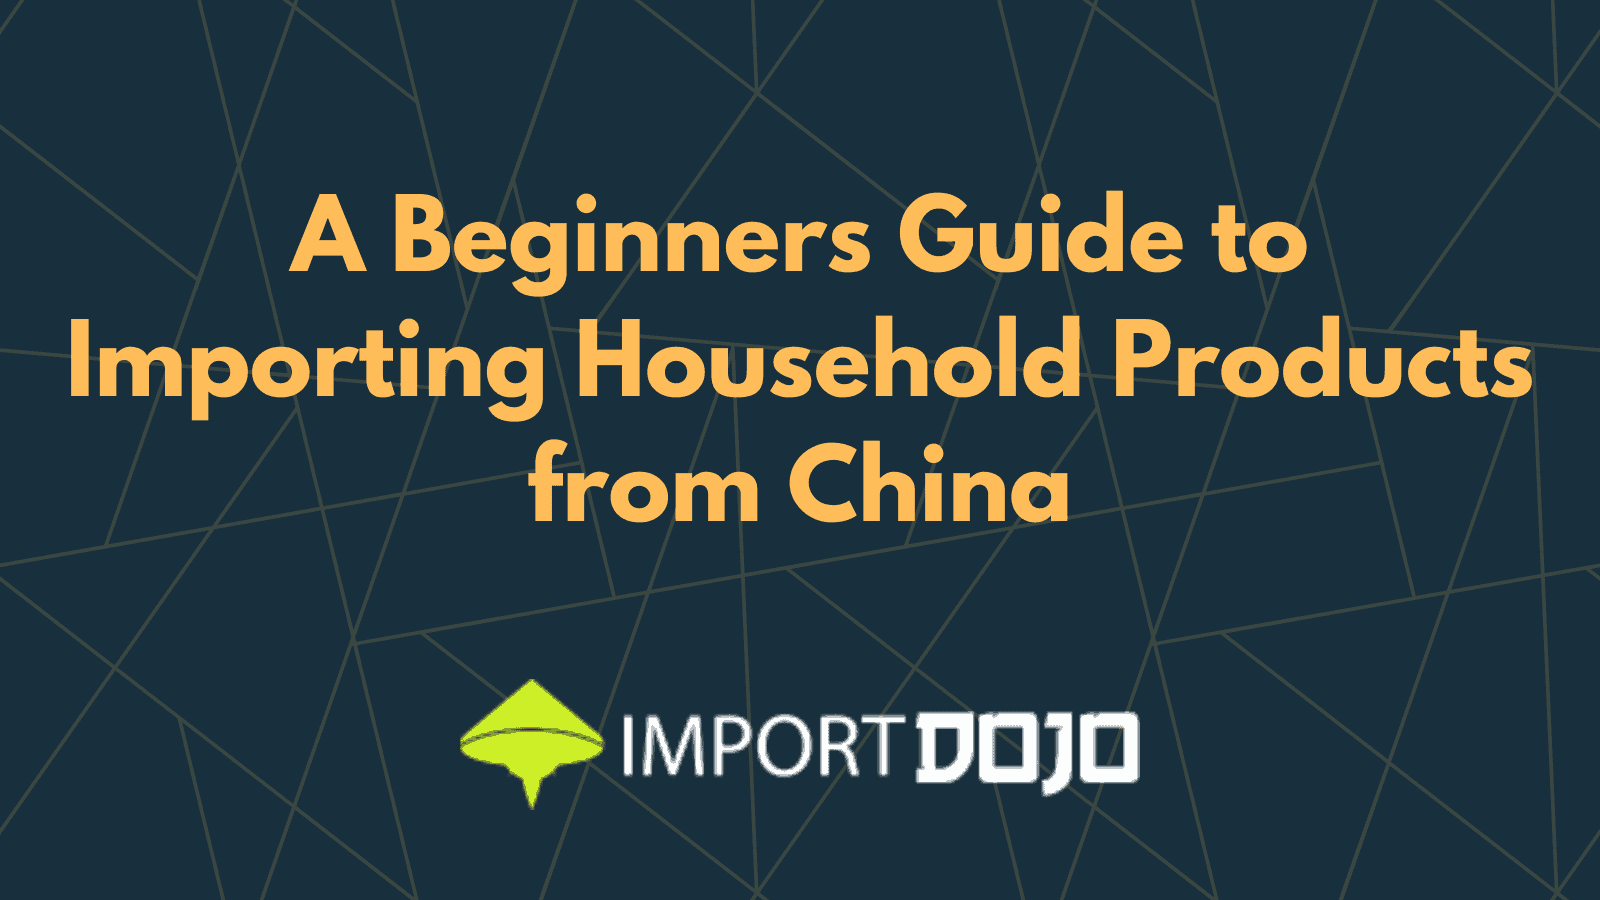 A Beginners Guide to Importing Household Products from China